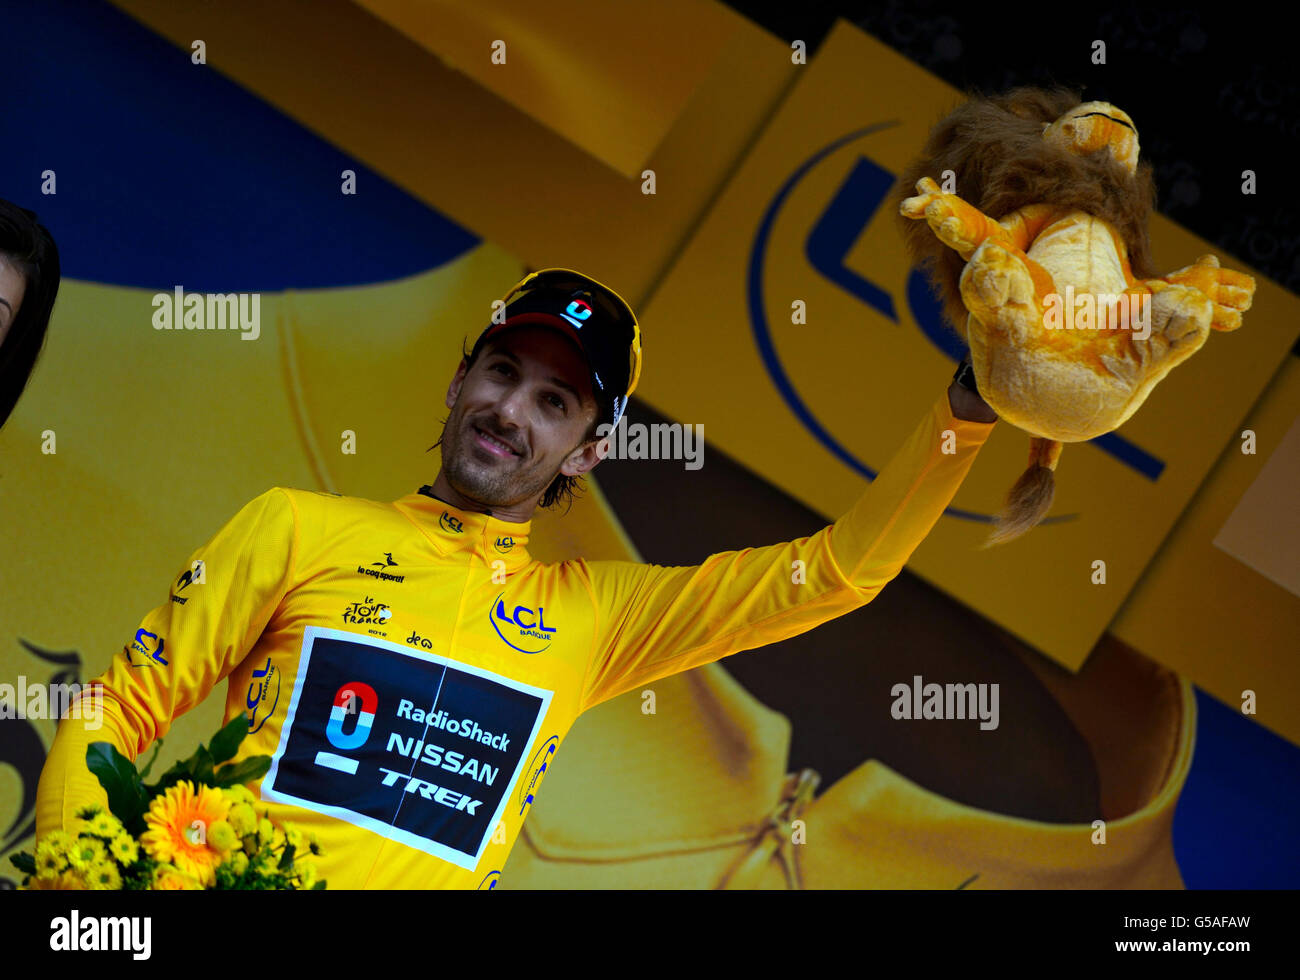 Fabian Cancellara stands on the podium with his trophy and collects the yellow leader's jersey after winning the Prologue Stage of the 2012 Tour de France in Liege, Belgium. Stock Photo